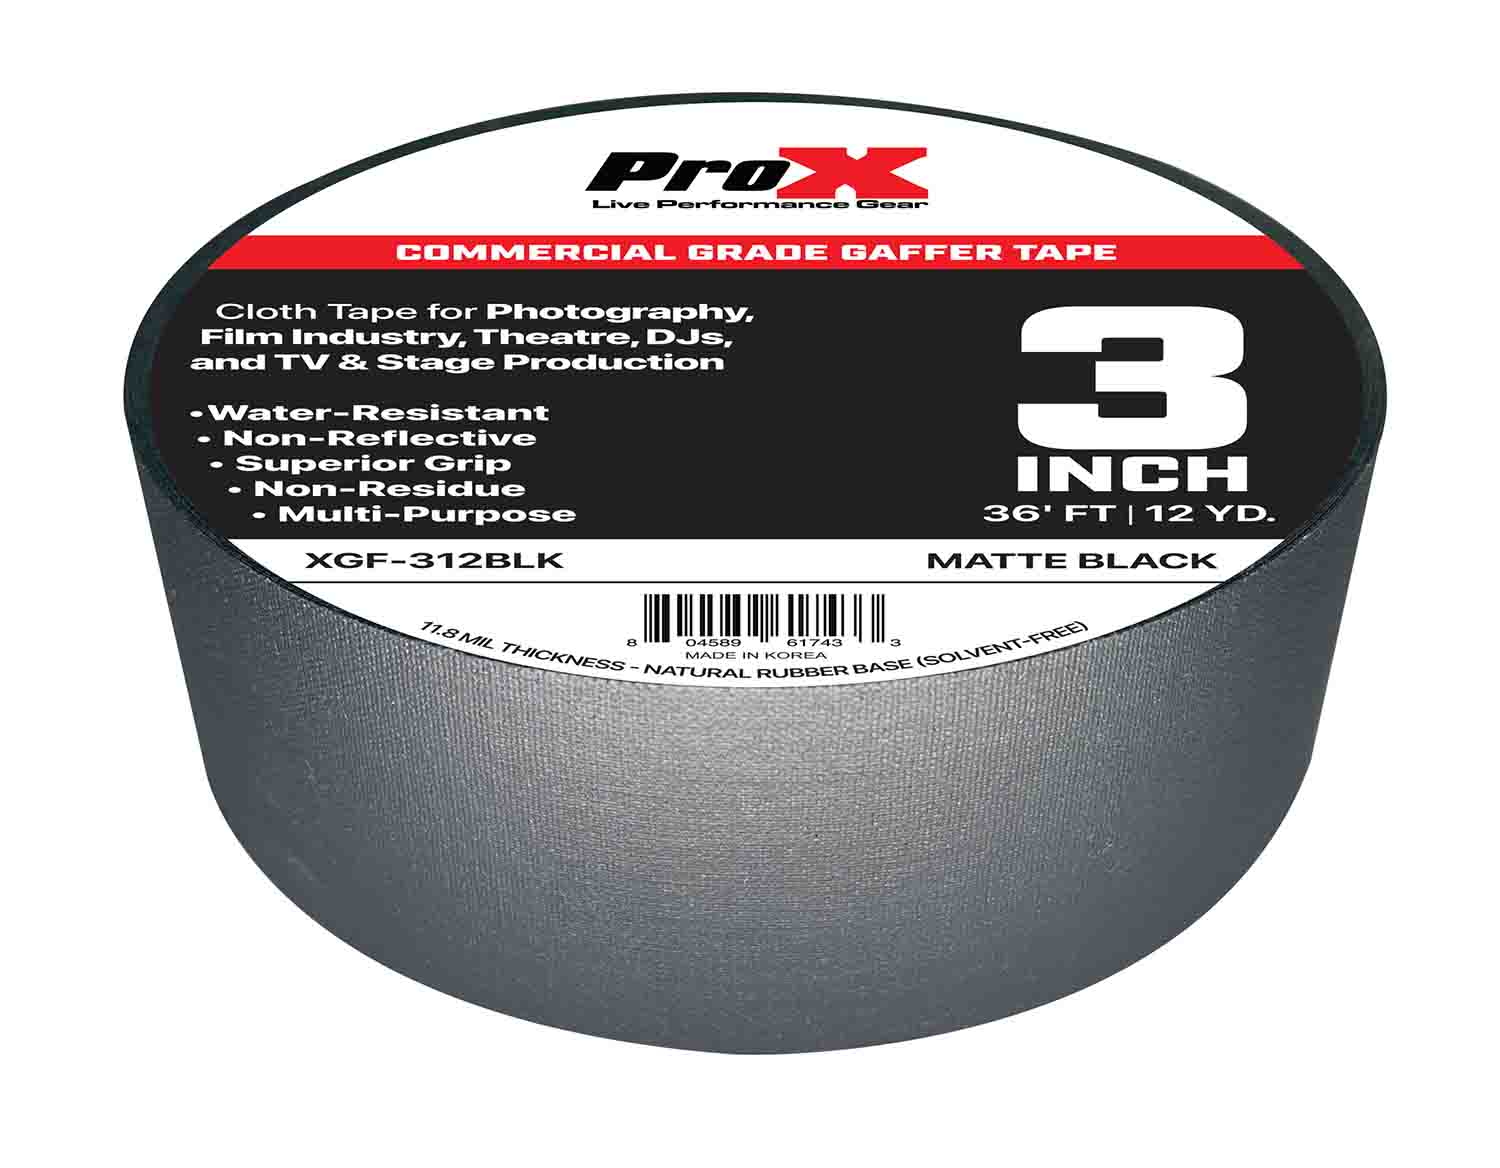 ProX XGF-312BLK, 3 Inch 12YD Matte Black Commercial Grade Gaffer Tape Pros Choice Non-Residue - 36FT - Hollywood DJ